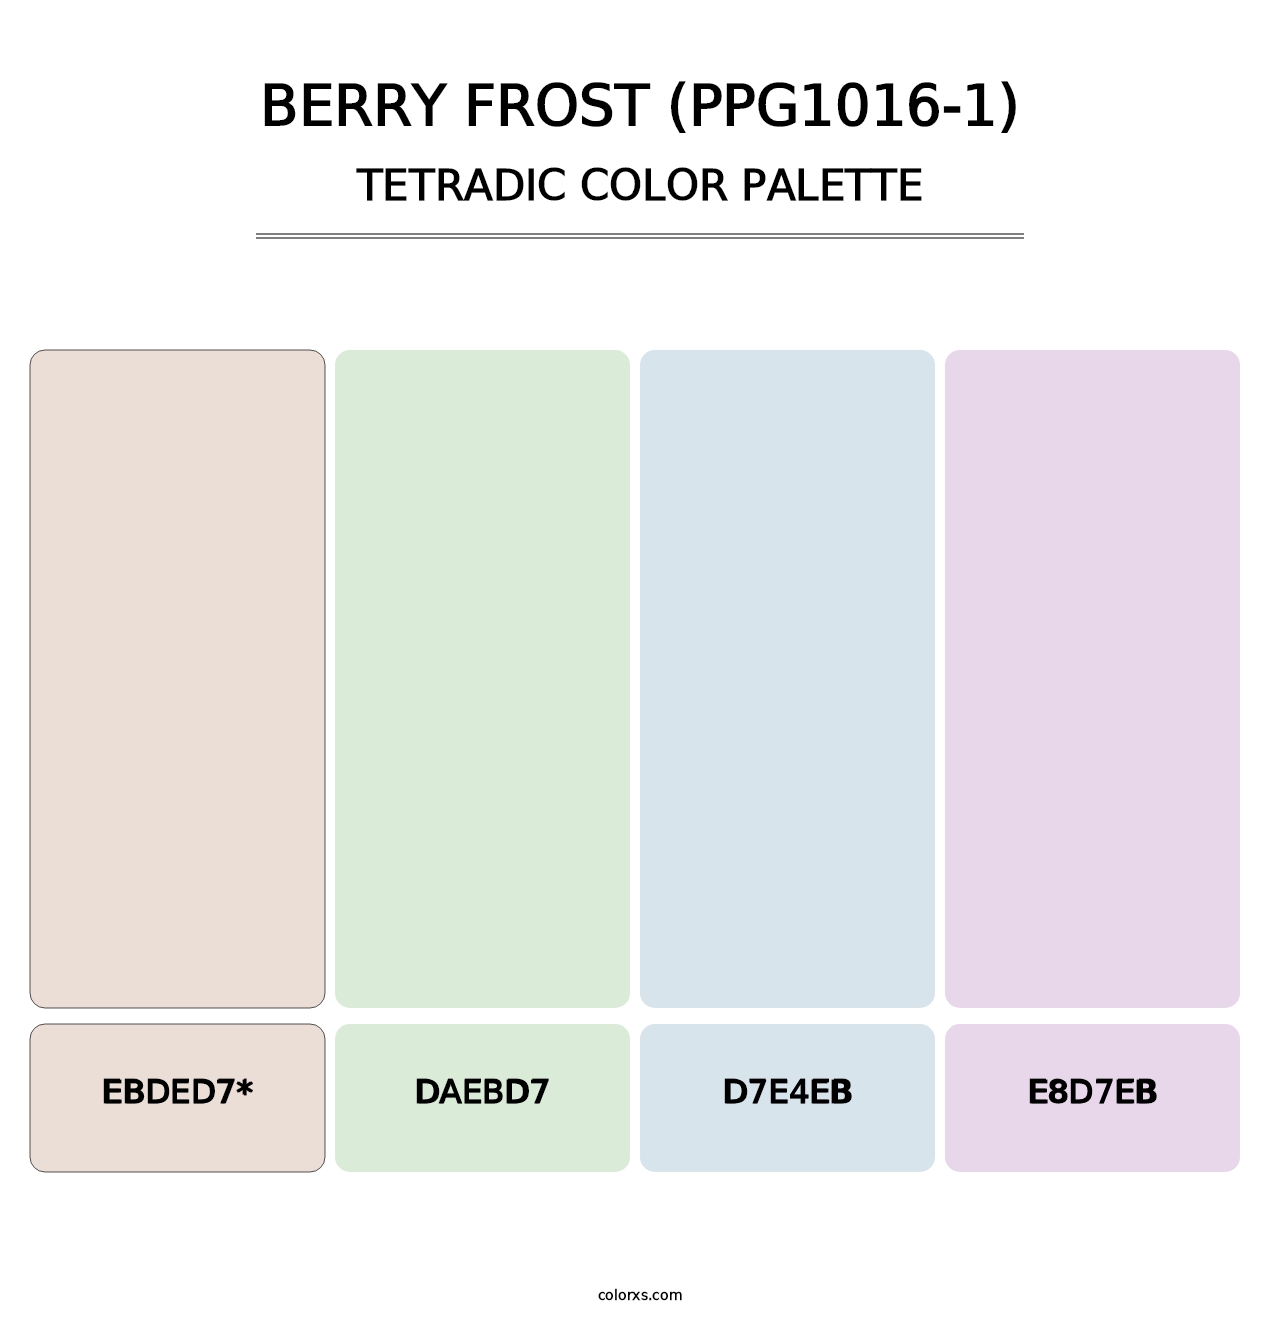 Berry Frost (PPG1016-1) - Tetradic Color Palette